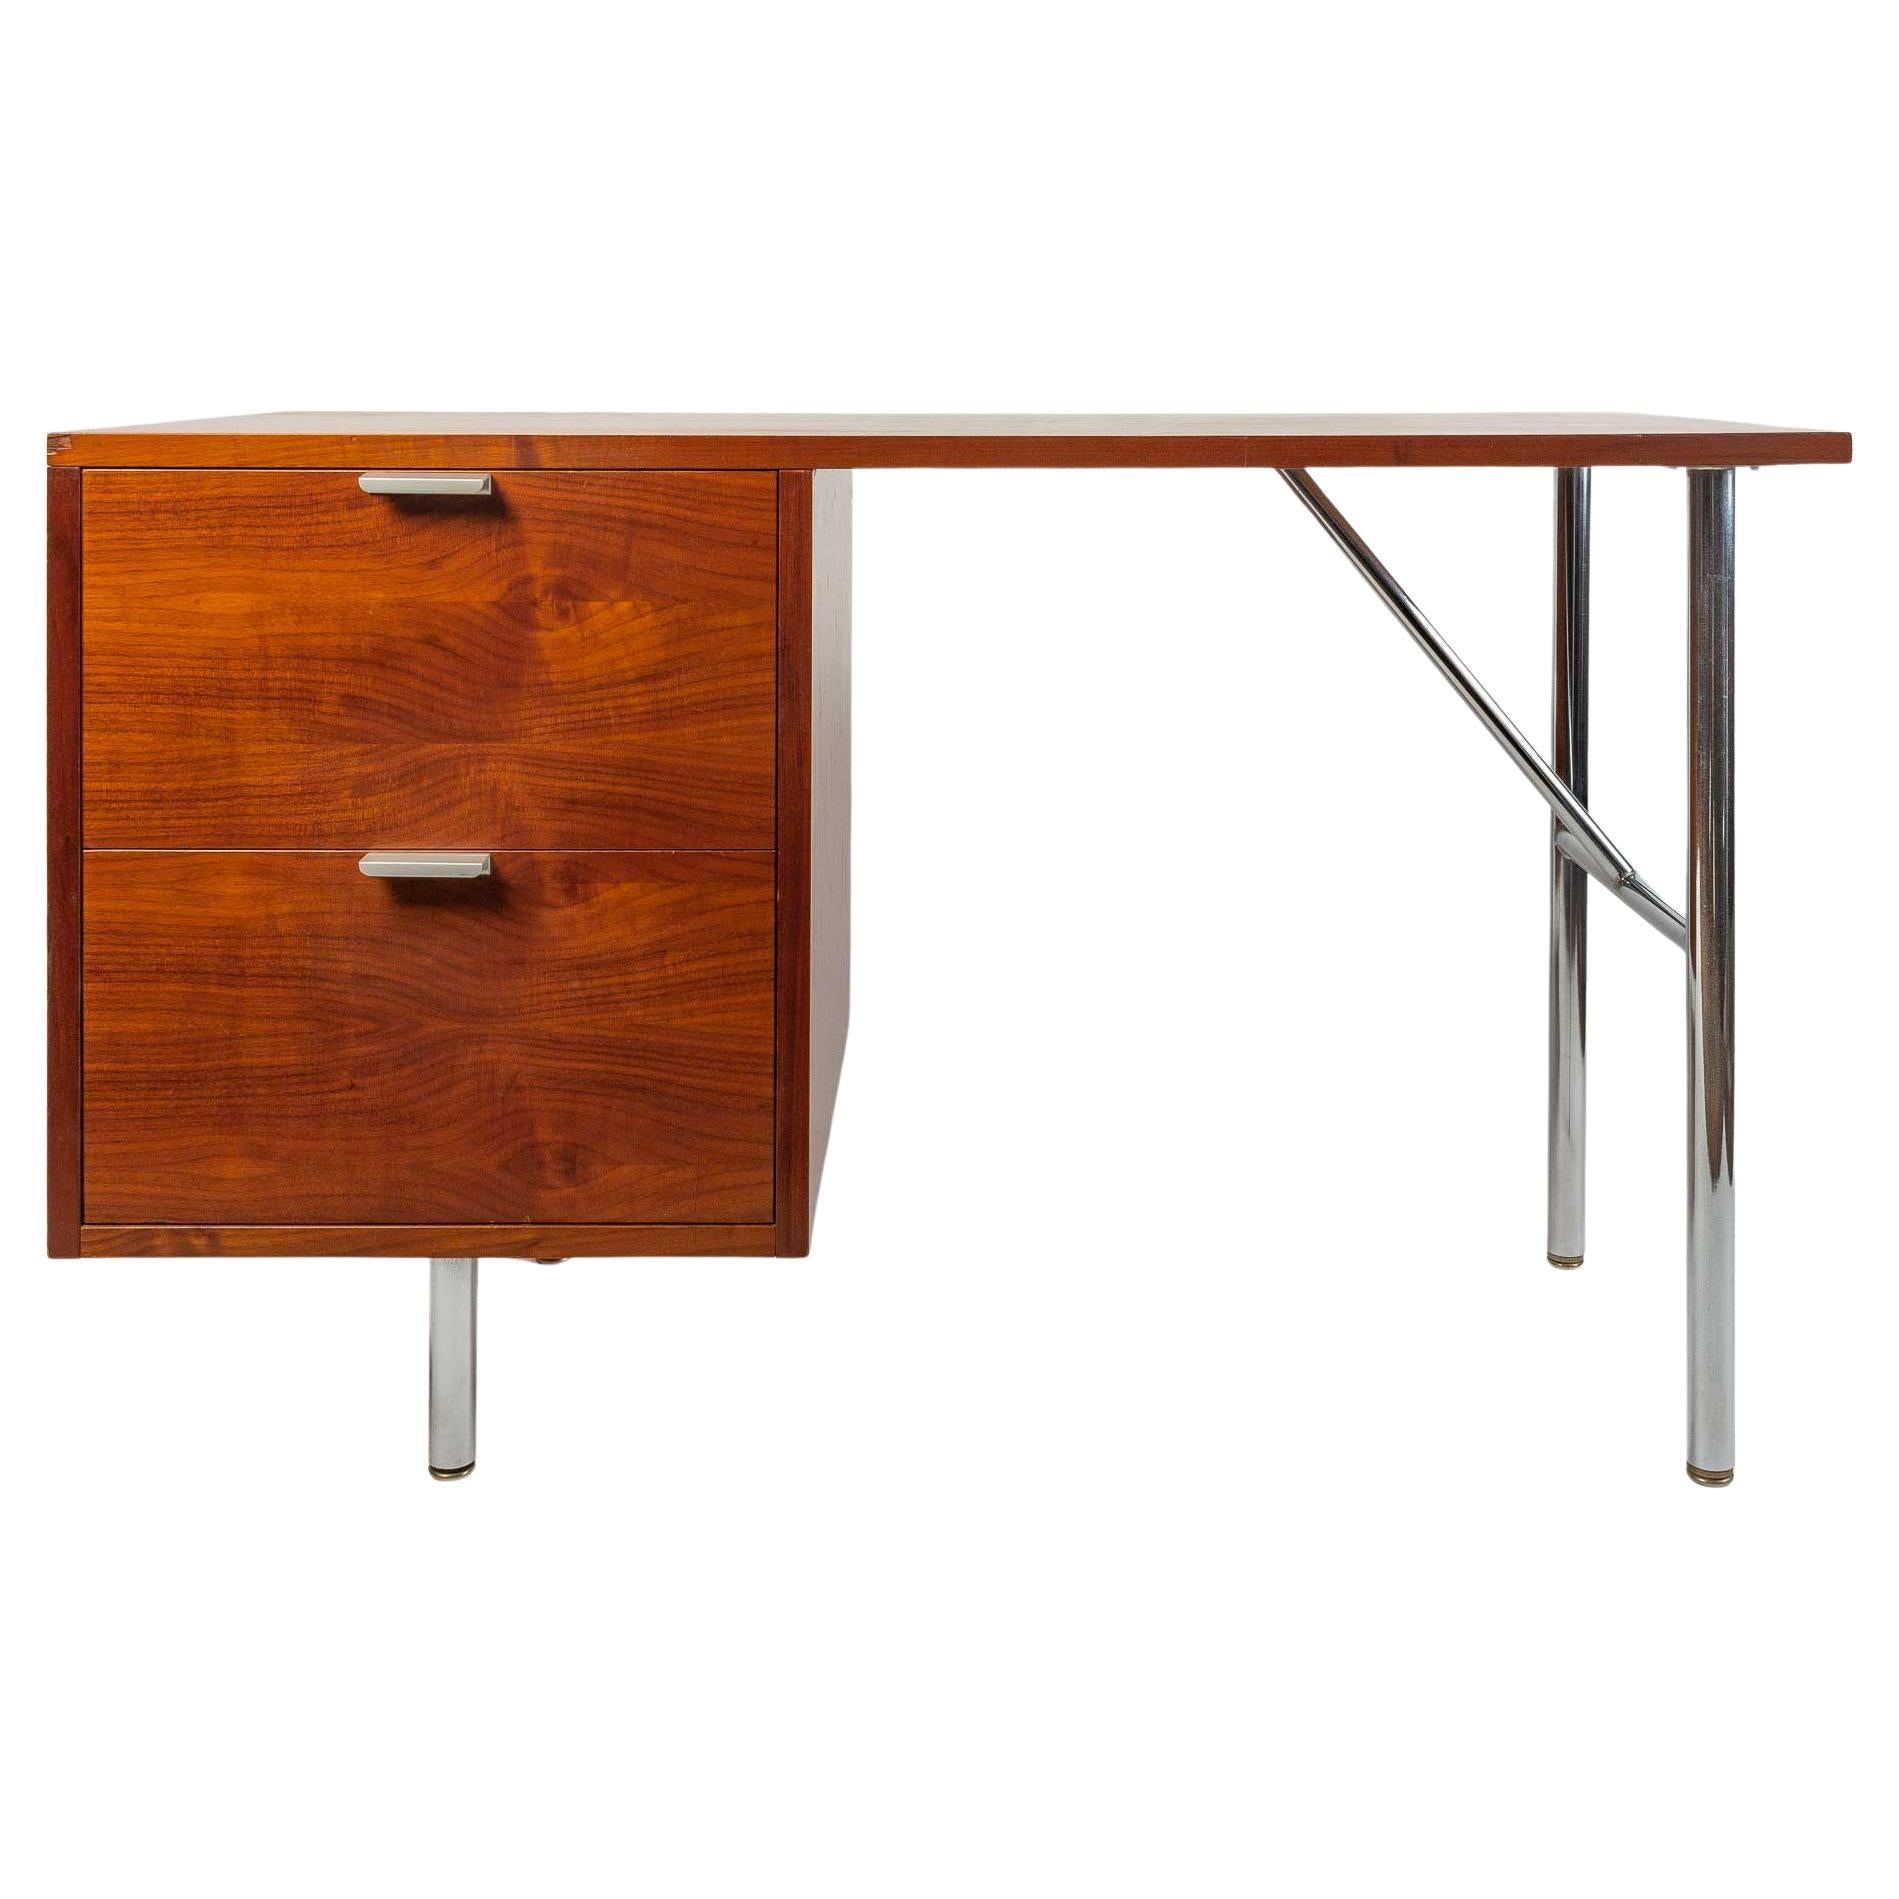 1950 Rare and Authentic Desk Designed by George Nelson for Herman Miller